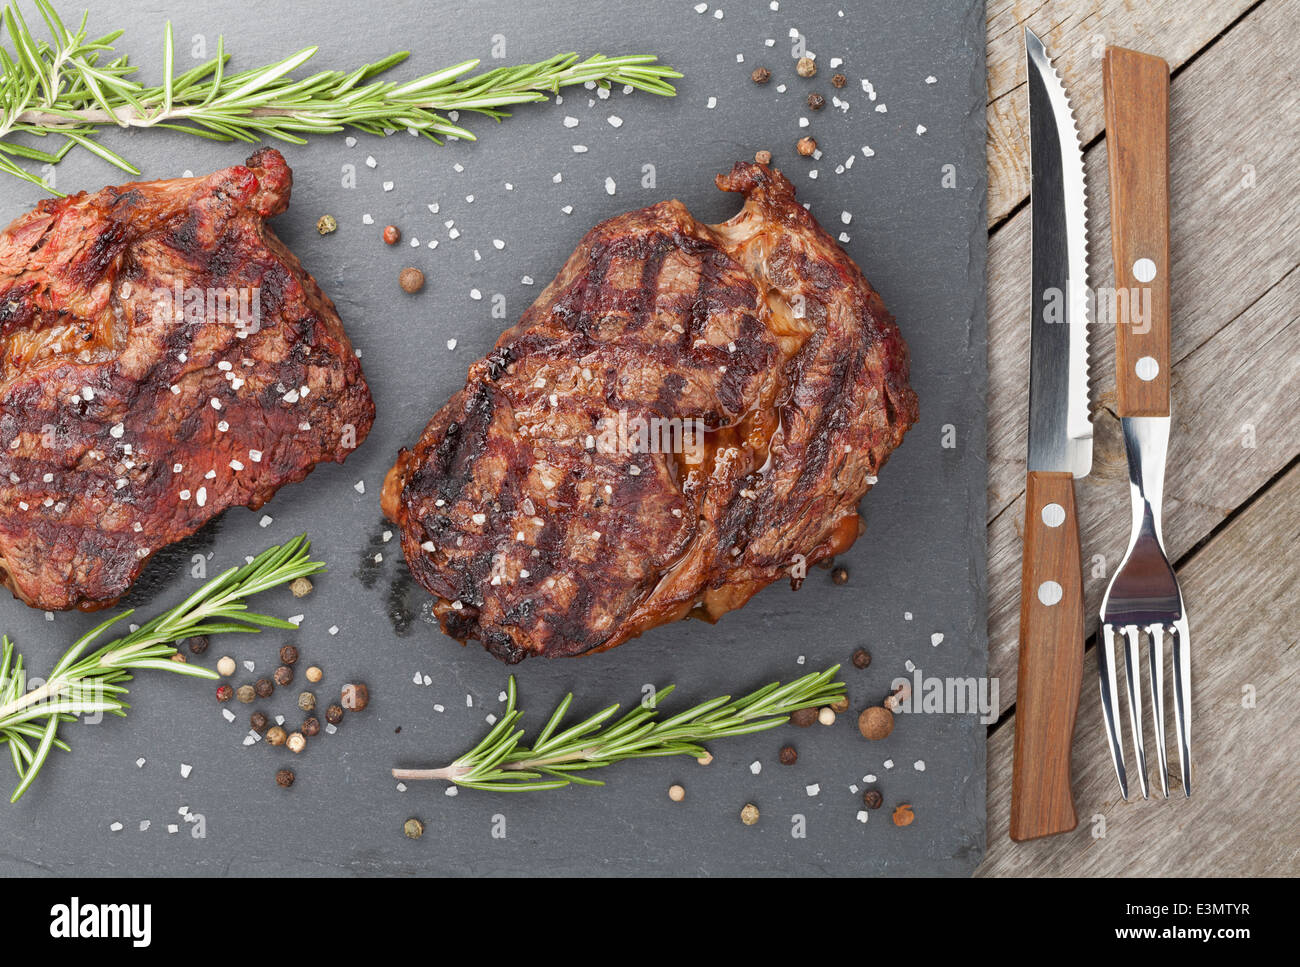 Beef steaks with rosemary and spices on wooden table Stock Photo